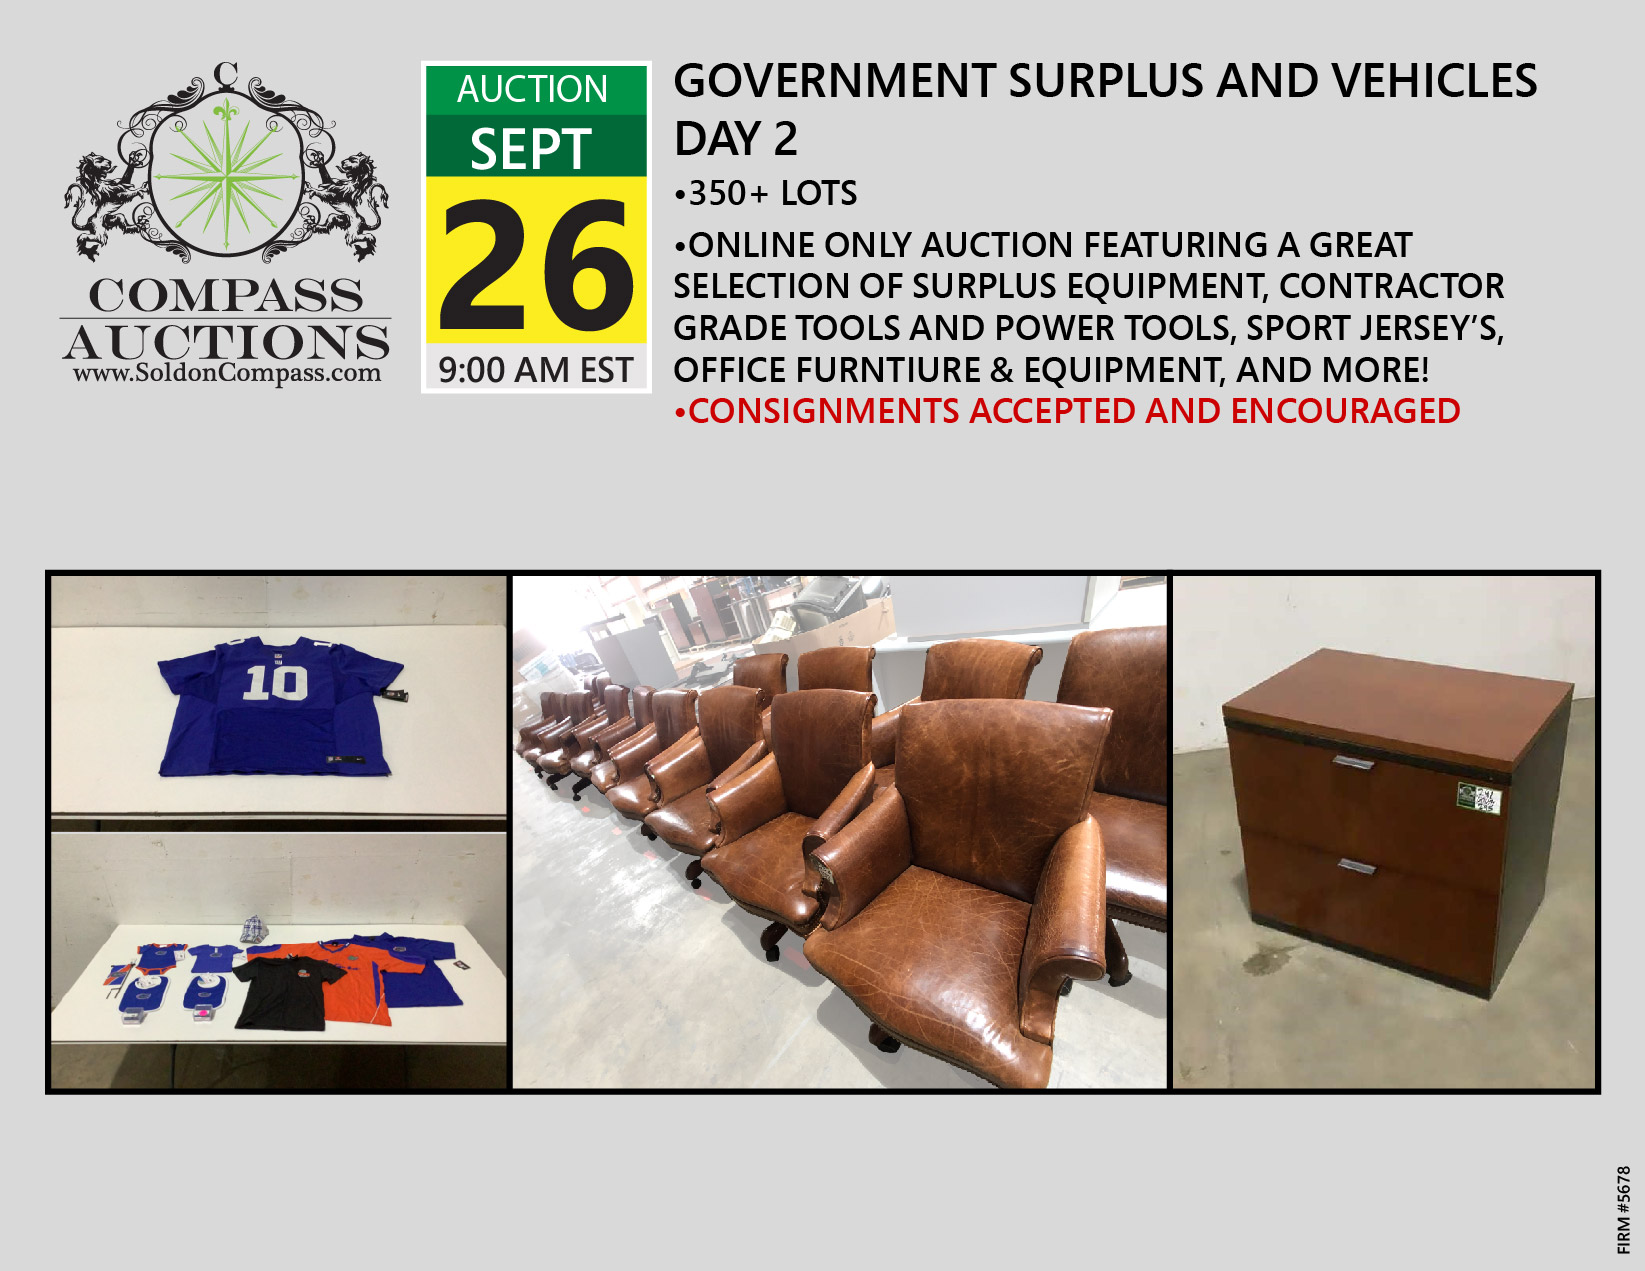 September online only public auction contractor grade tools equipment surplus assets office furniture